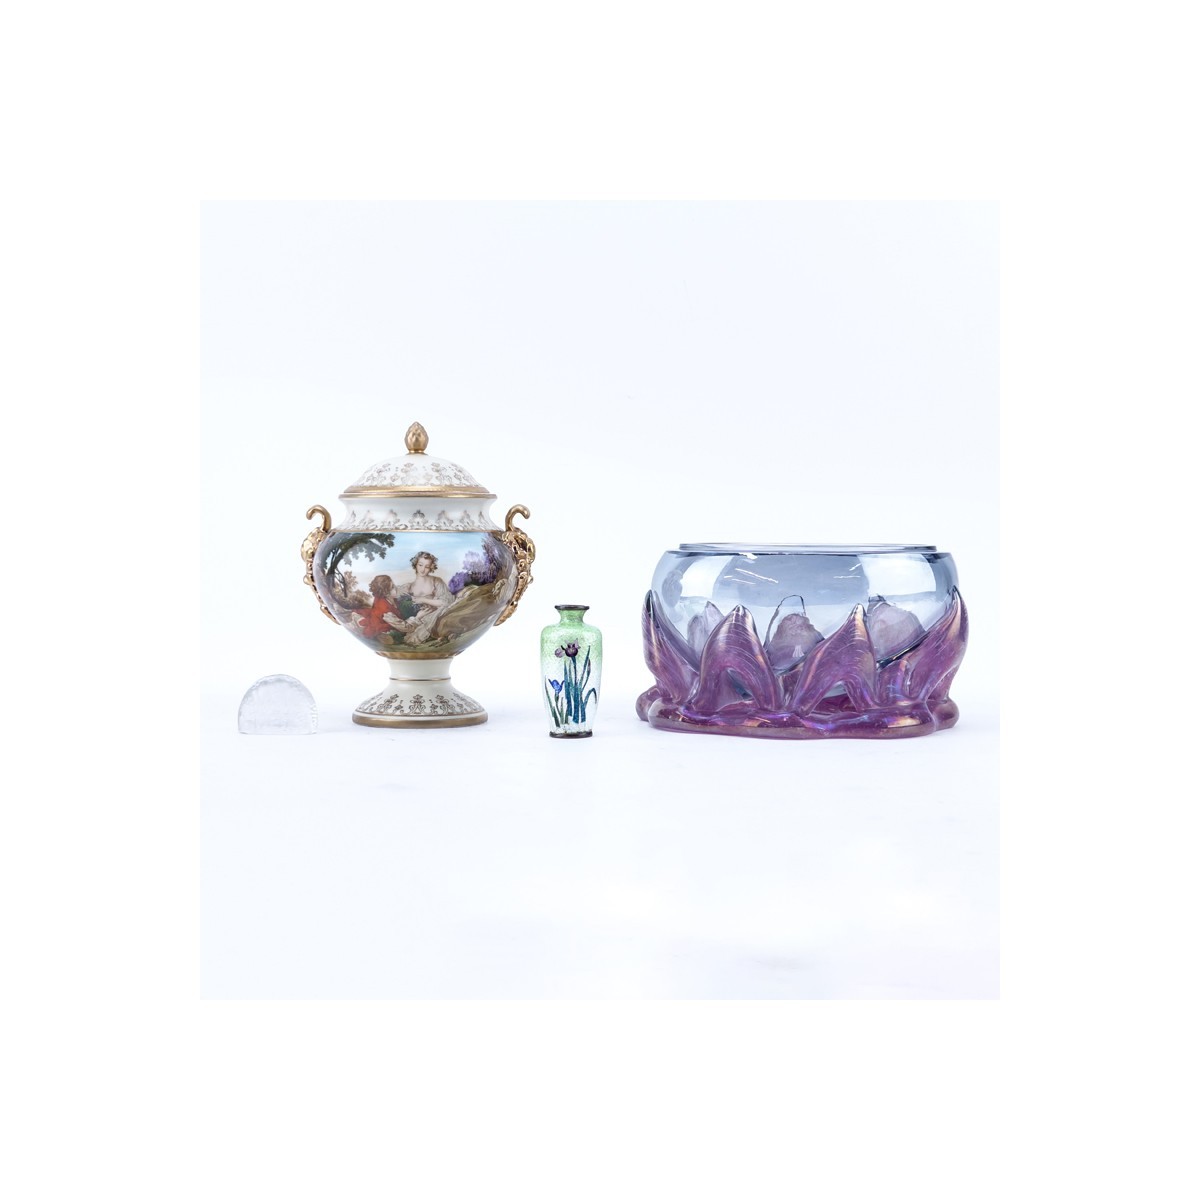 Grouping of Four (4): Mid Century Art Glass Bowl, Lalique Crystal Paperweight, Antique Miniature Japanese Cloisonné Vase, Vintage Porcelain Covered Urn. Cloisonné vase and Lalique paperweight are signed.